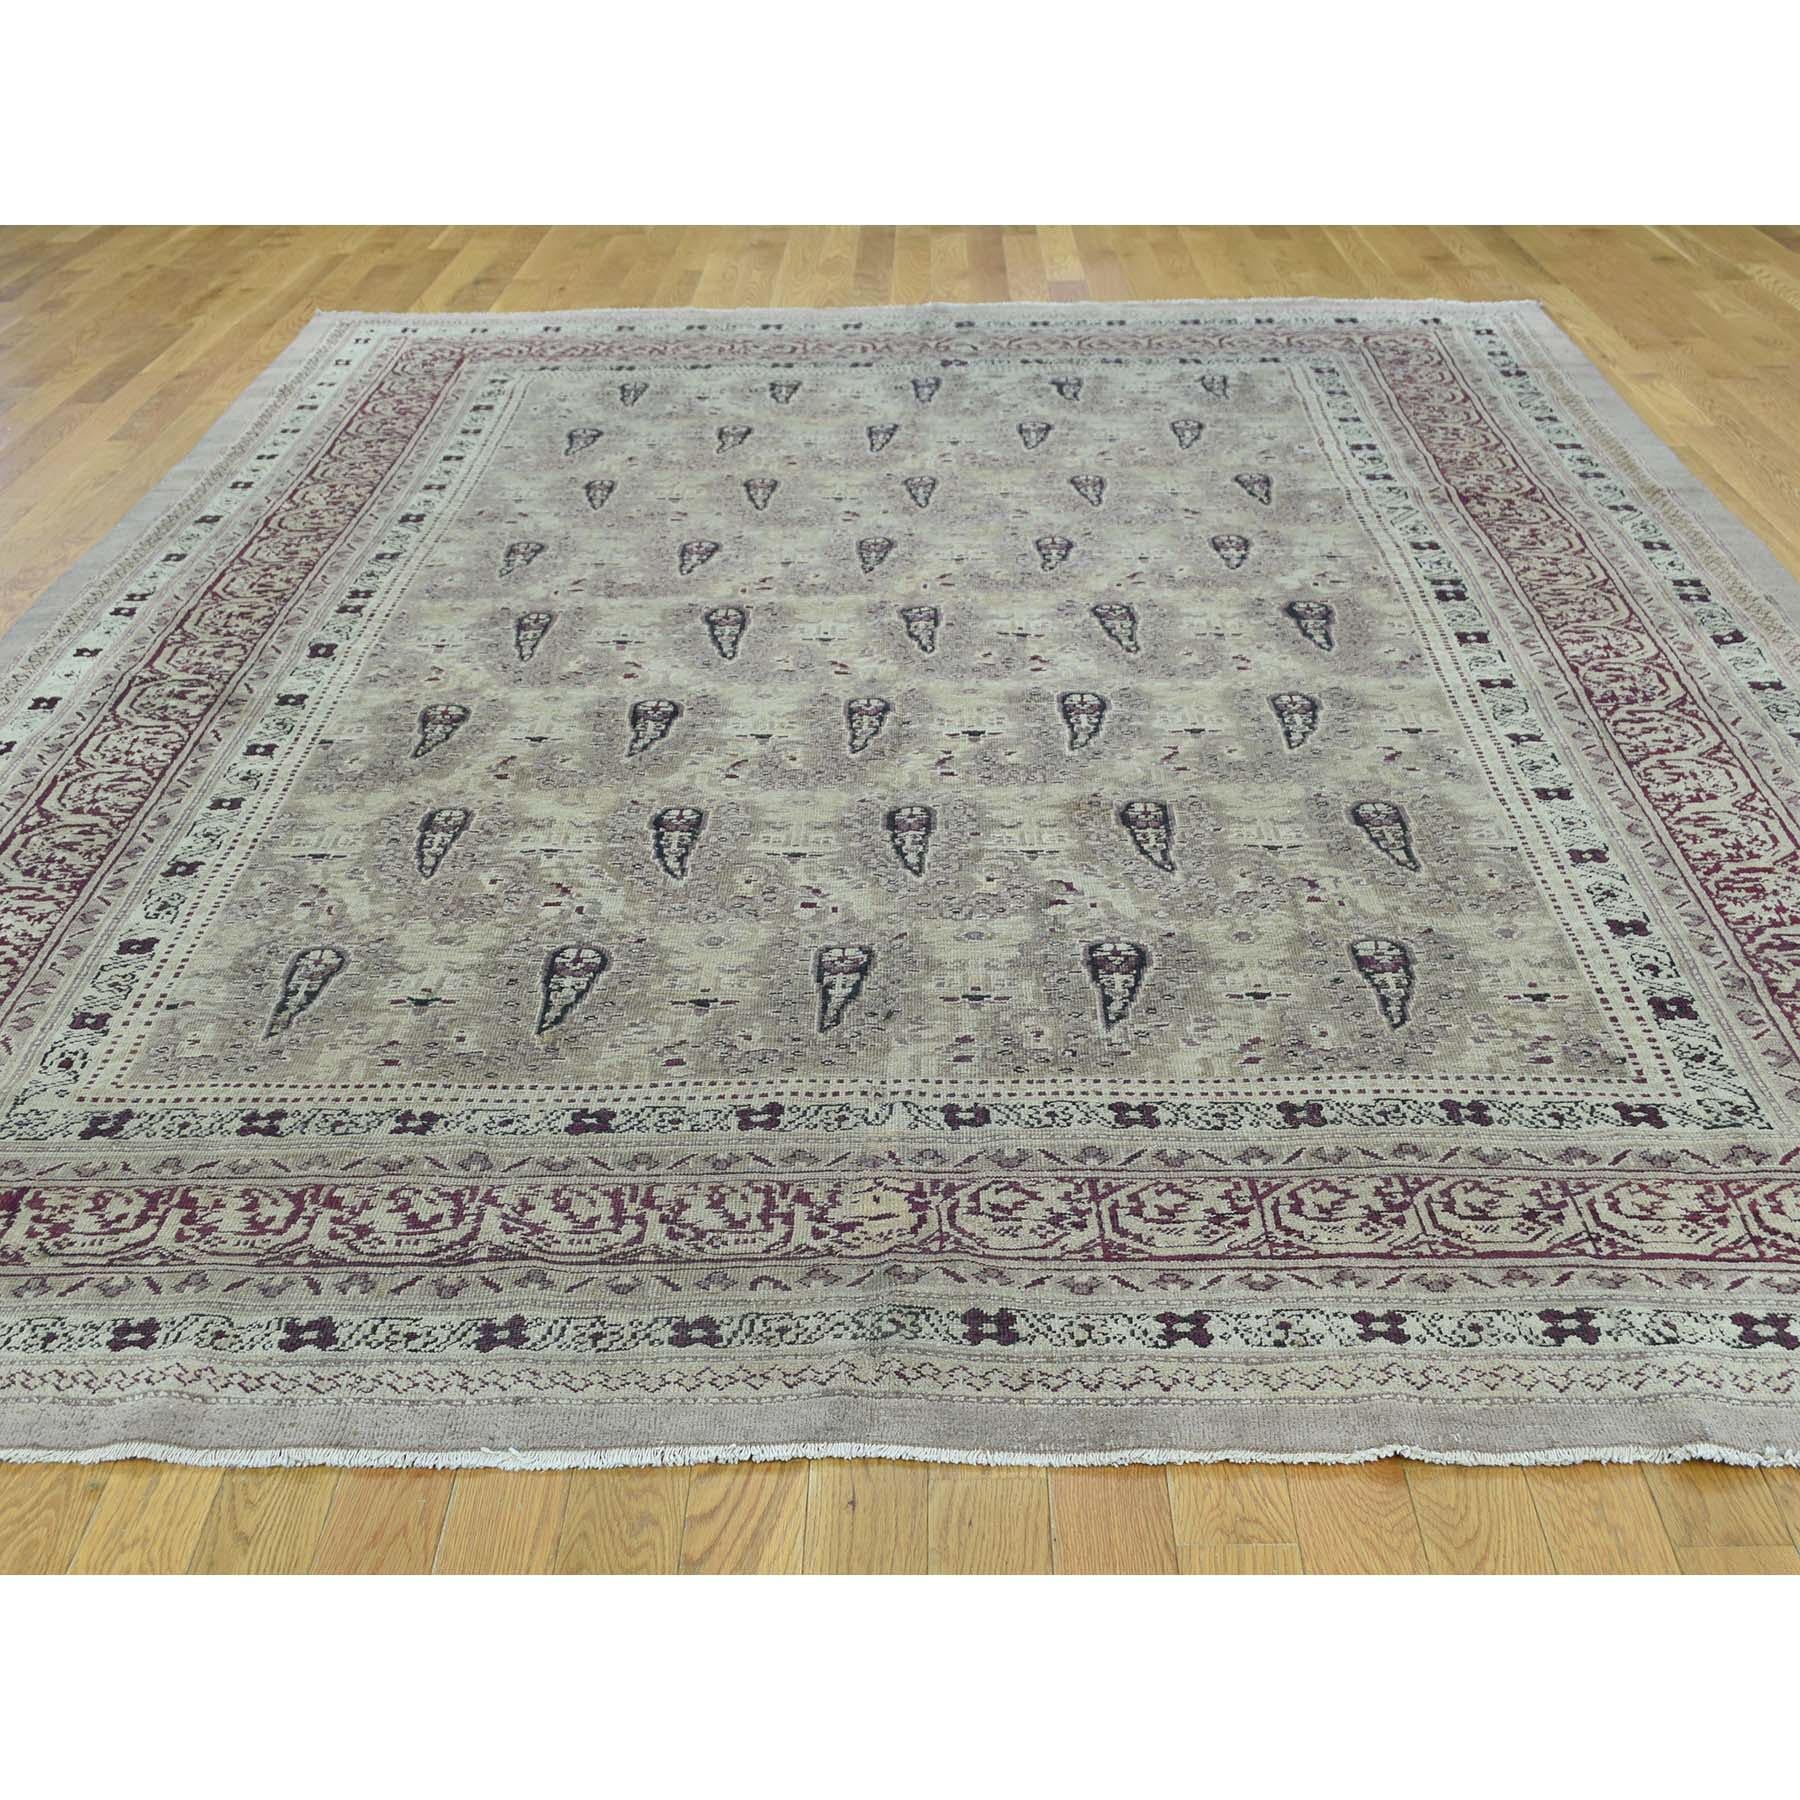 This is a truly genuine one of a kind antique Mughal Agra Paisley design excellent condition rug. It was made in the year 1900 in the centuries-old Persian weaving craftsmanship techniques by expert artisans, measures: 8'0